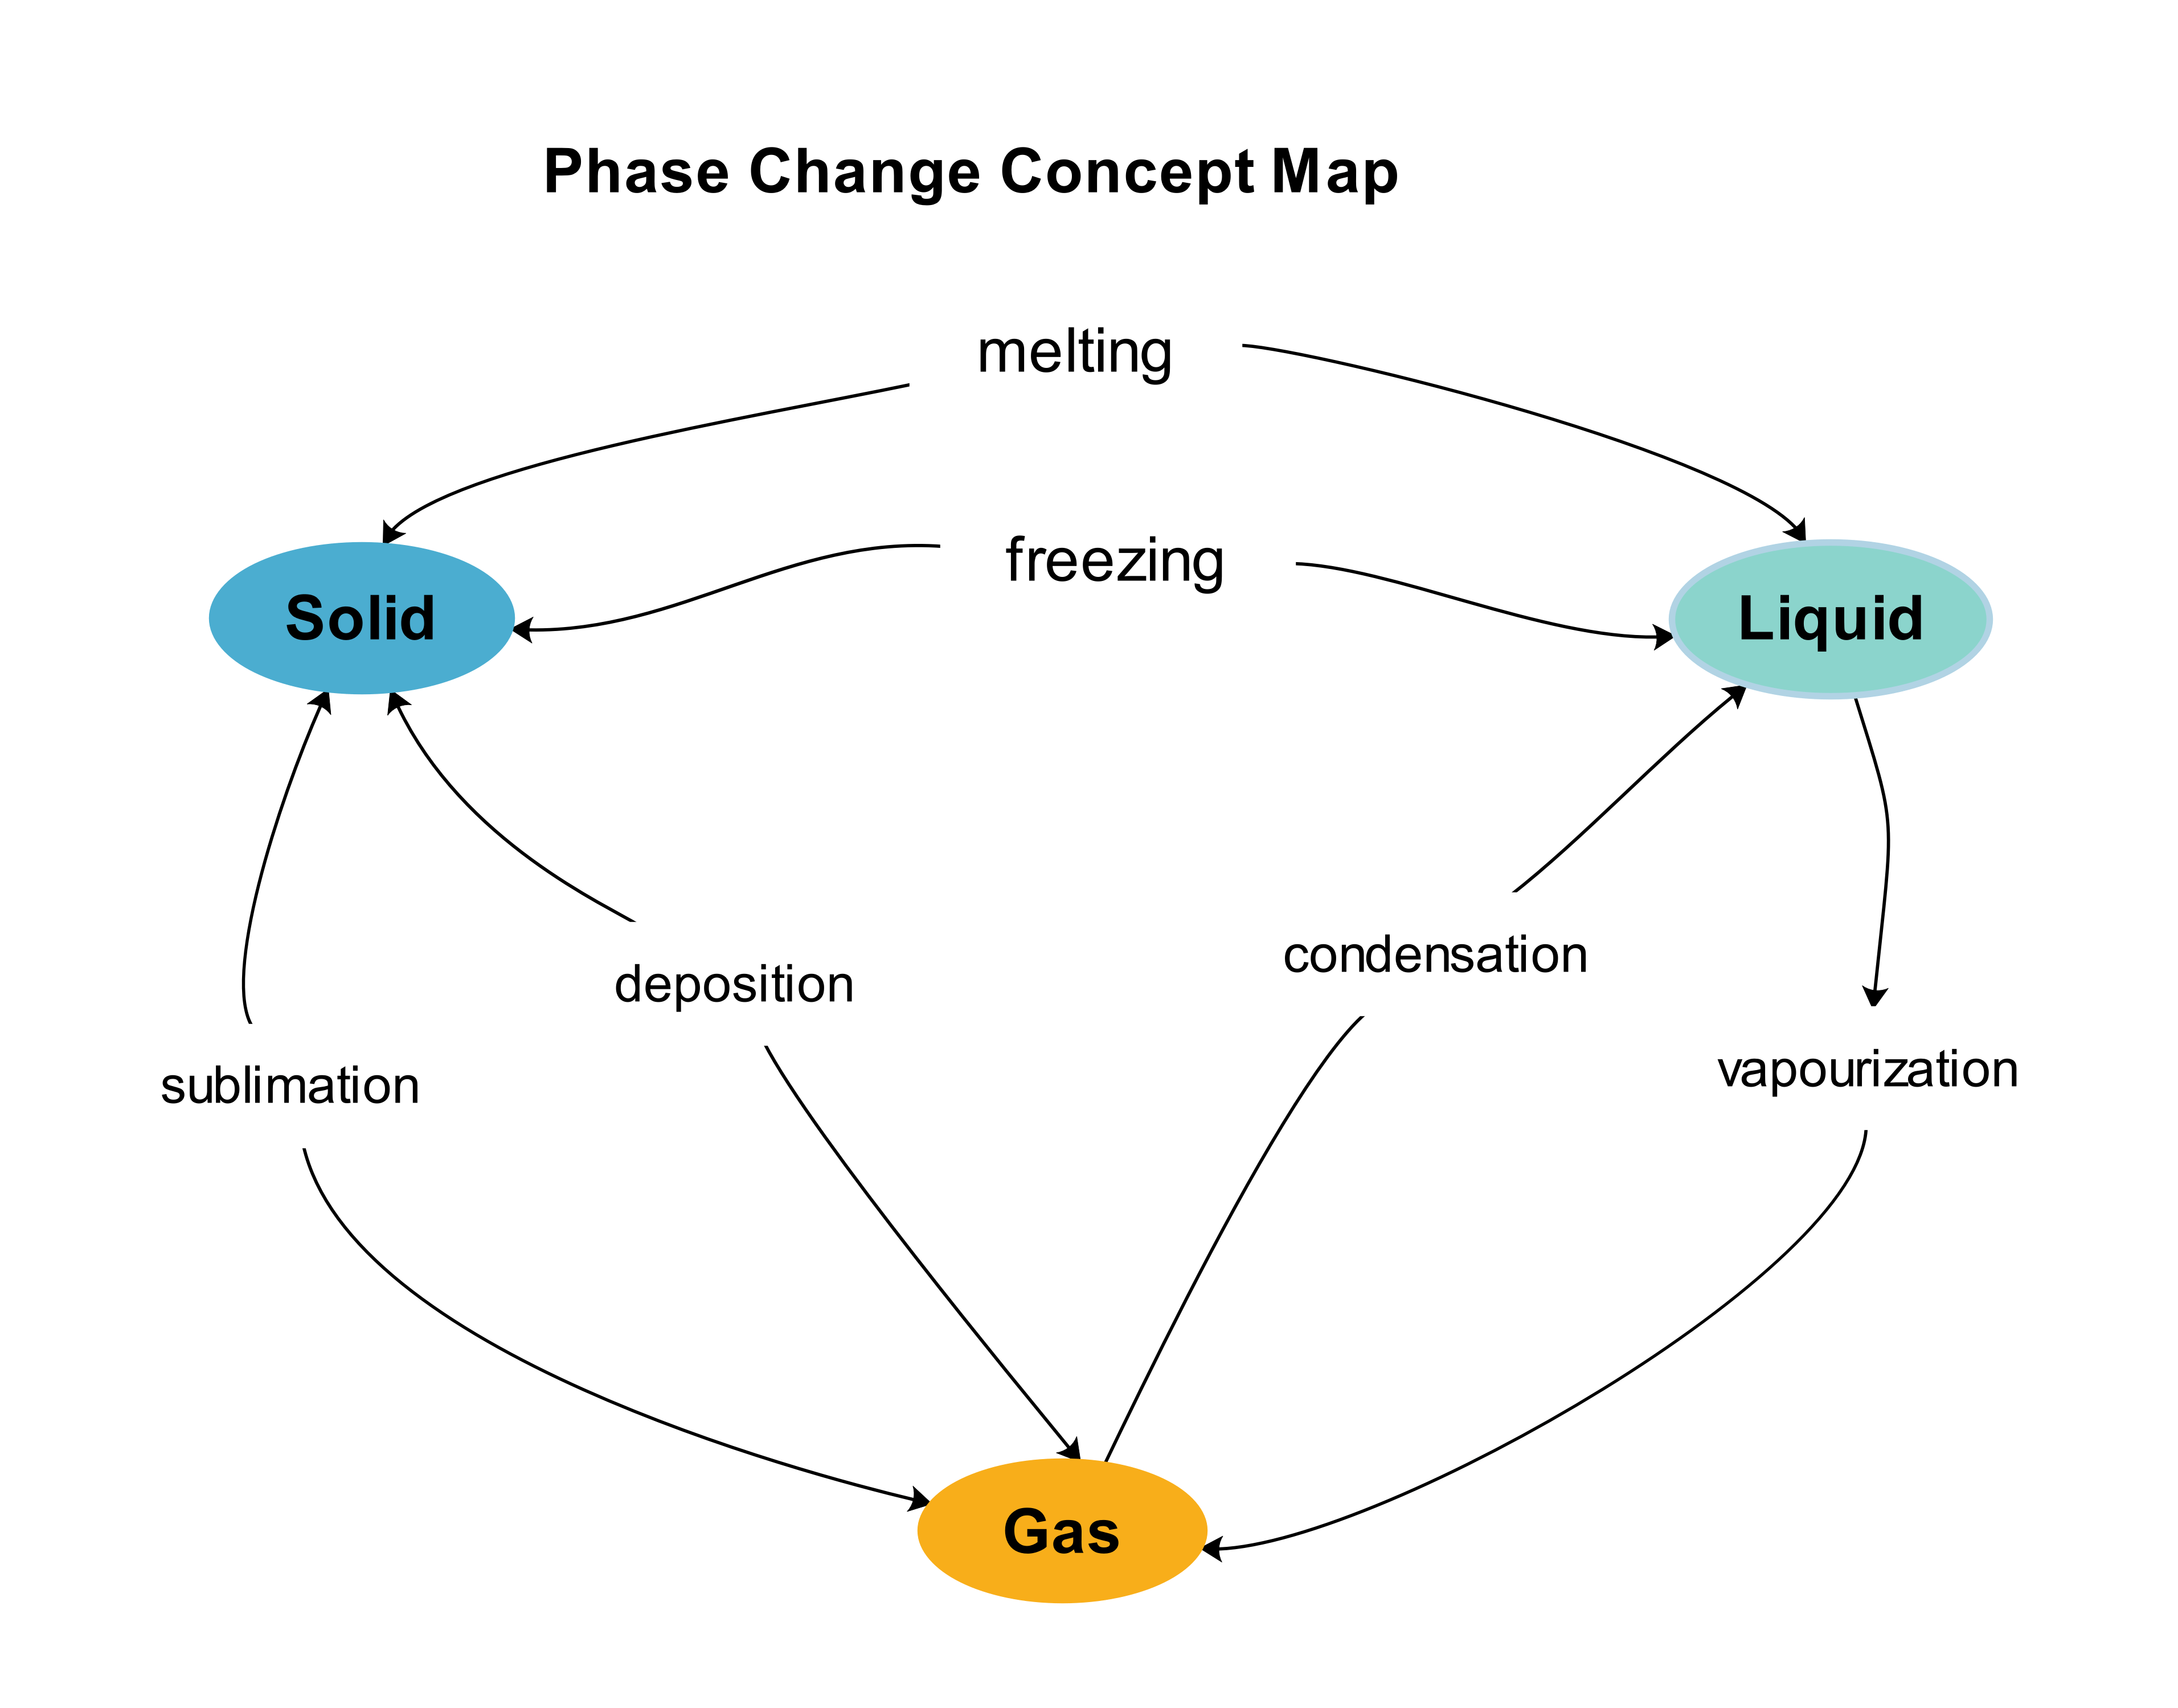 Phase Change Concept Map Templates